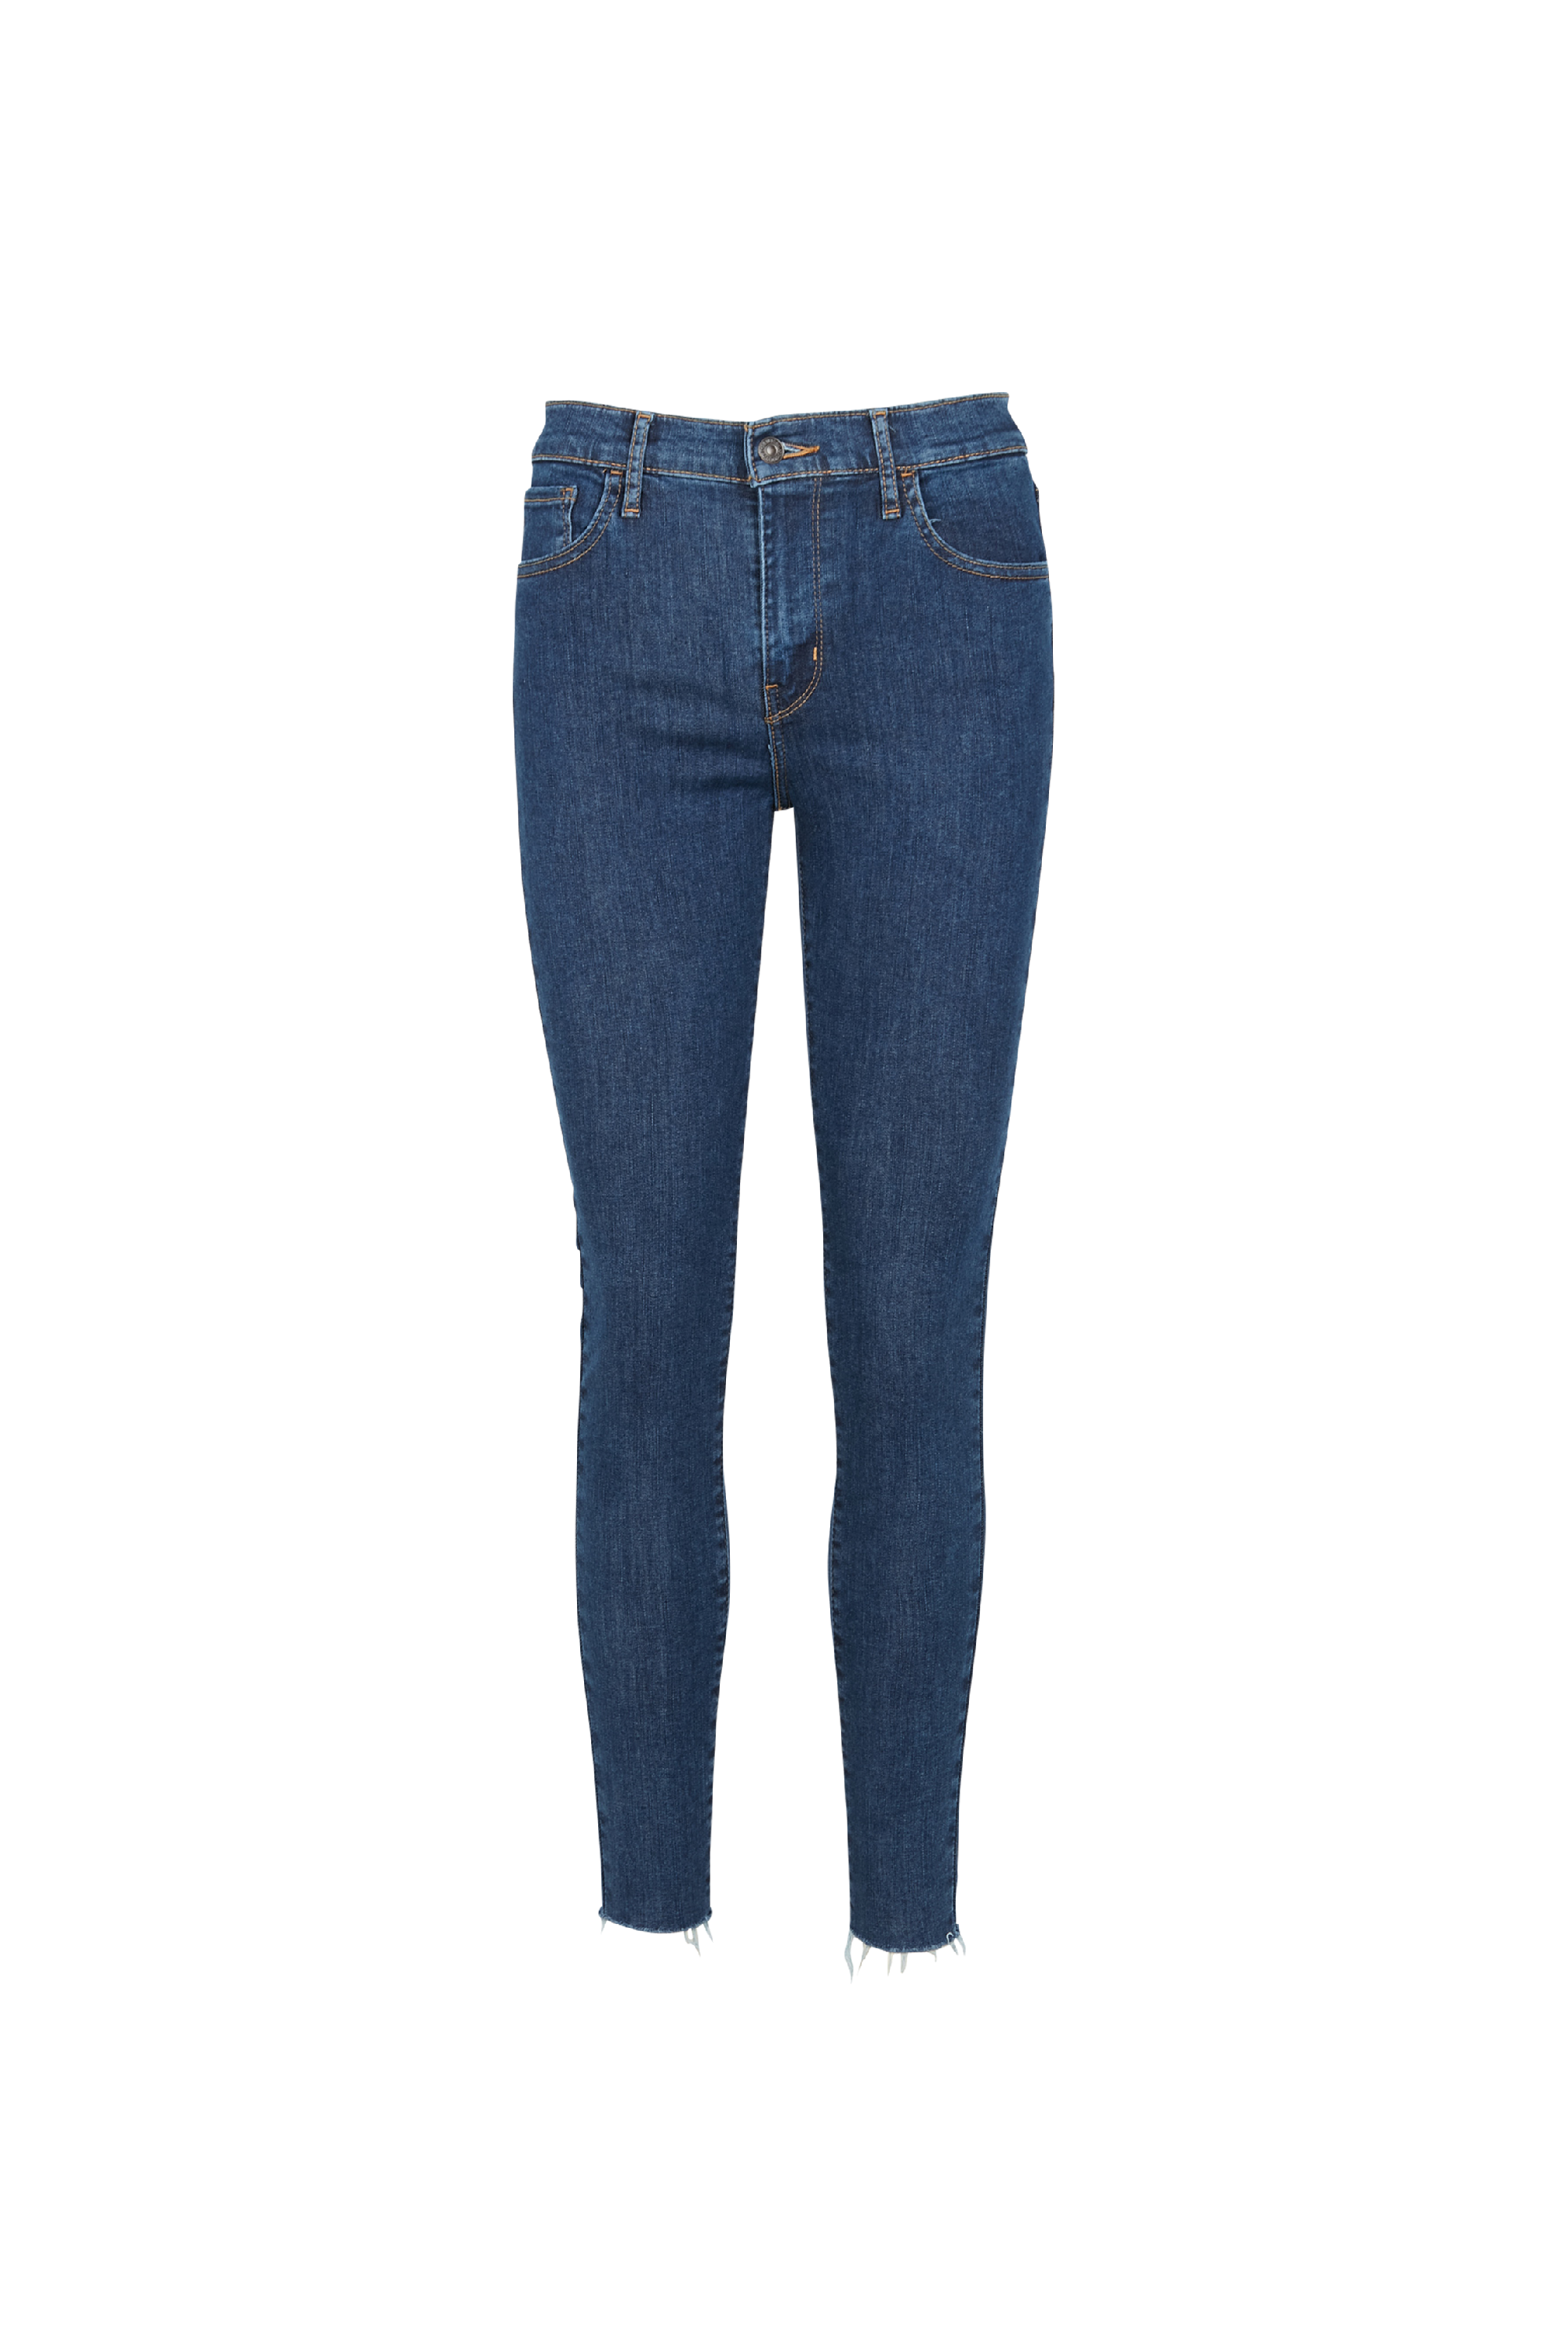 Levi's - Jean skinny taille haute - Taille 27/30